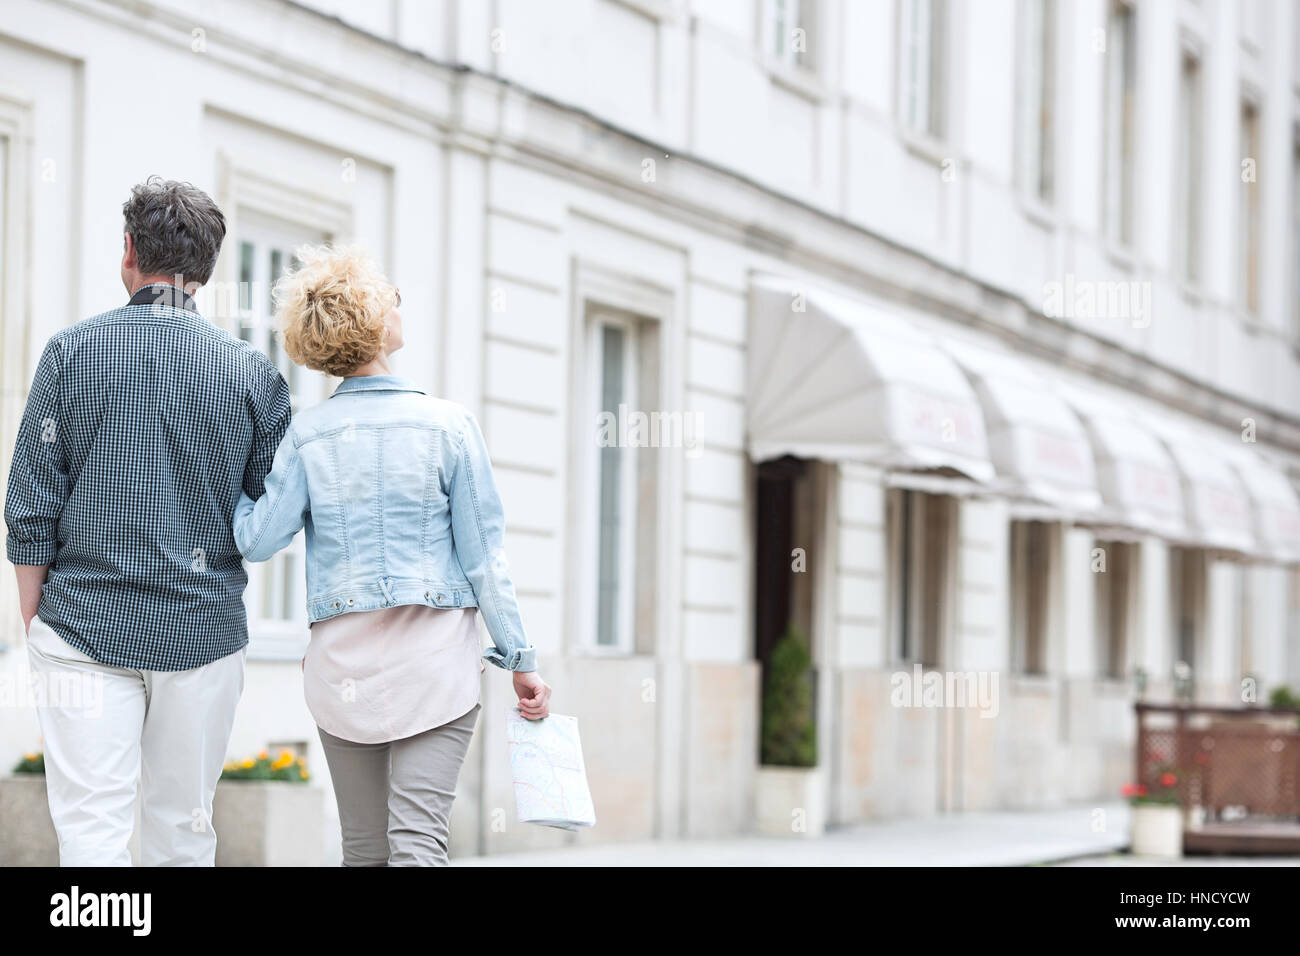 Rear view of middle-aged couple walking by building Stock Photo